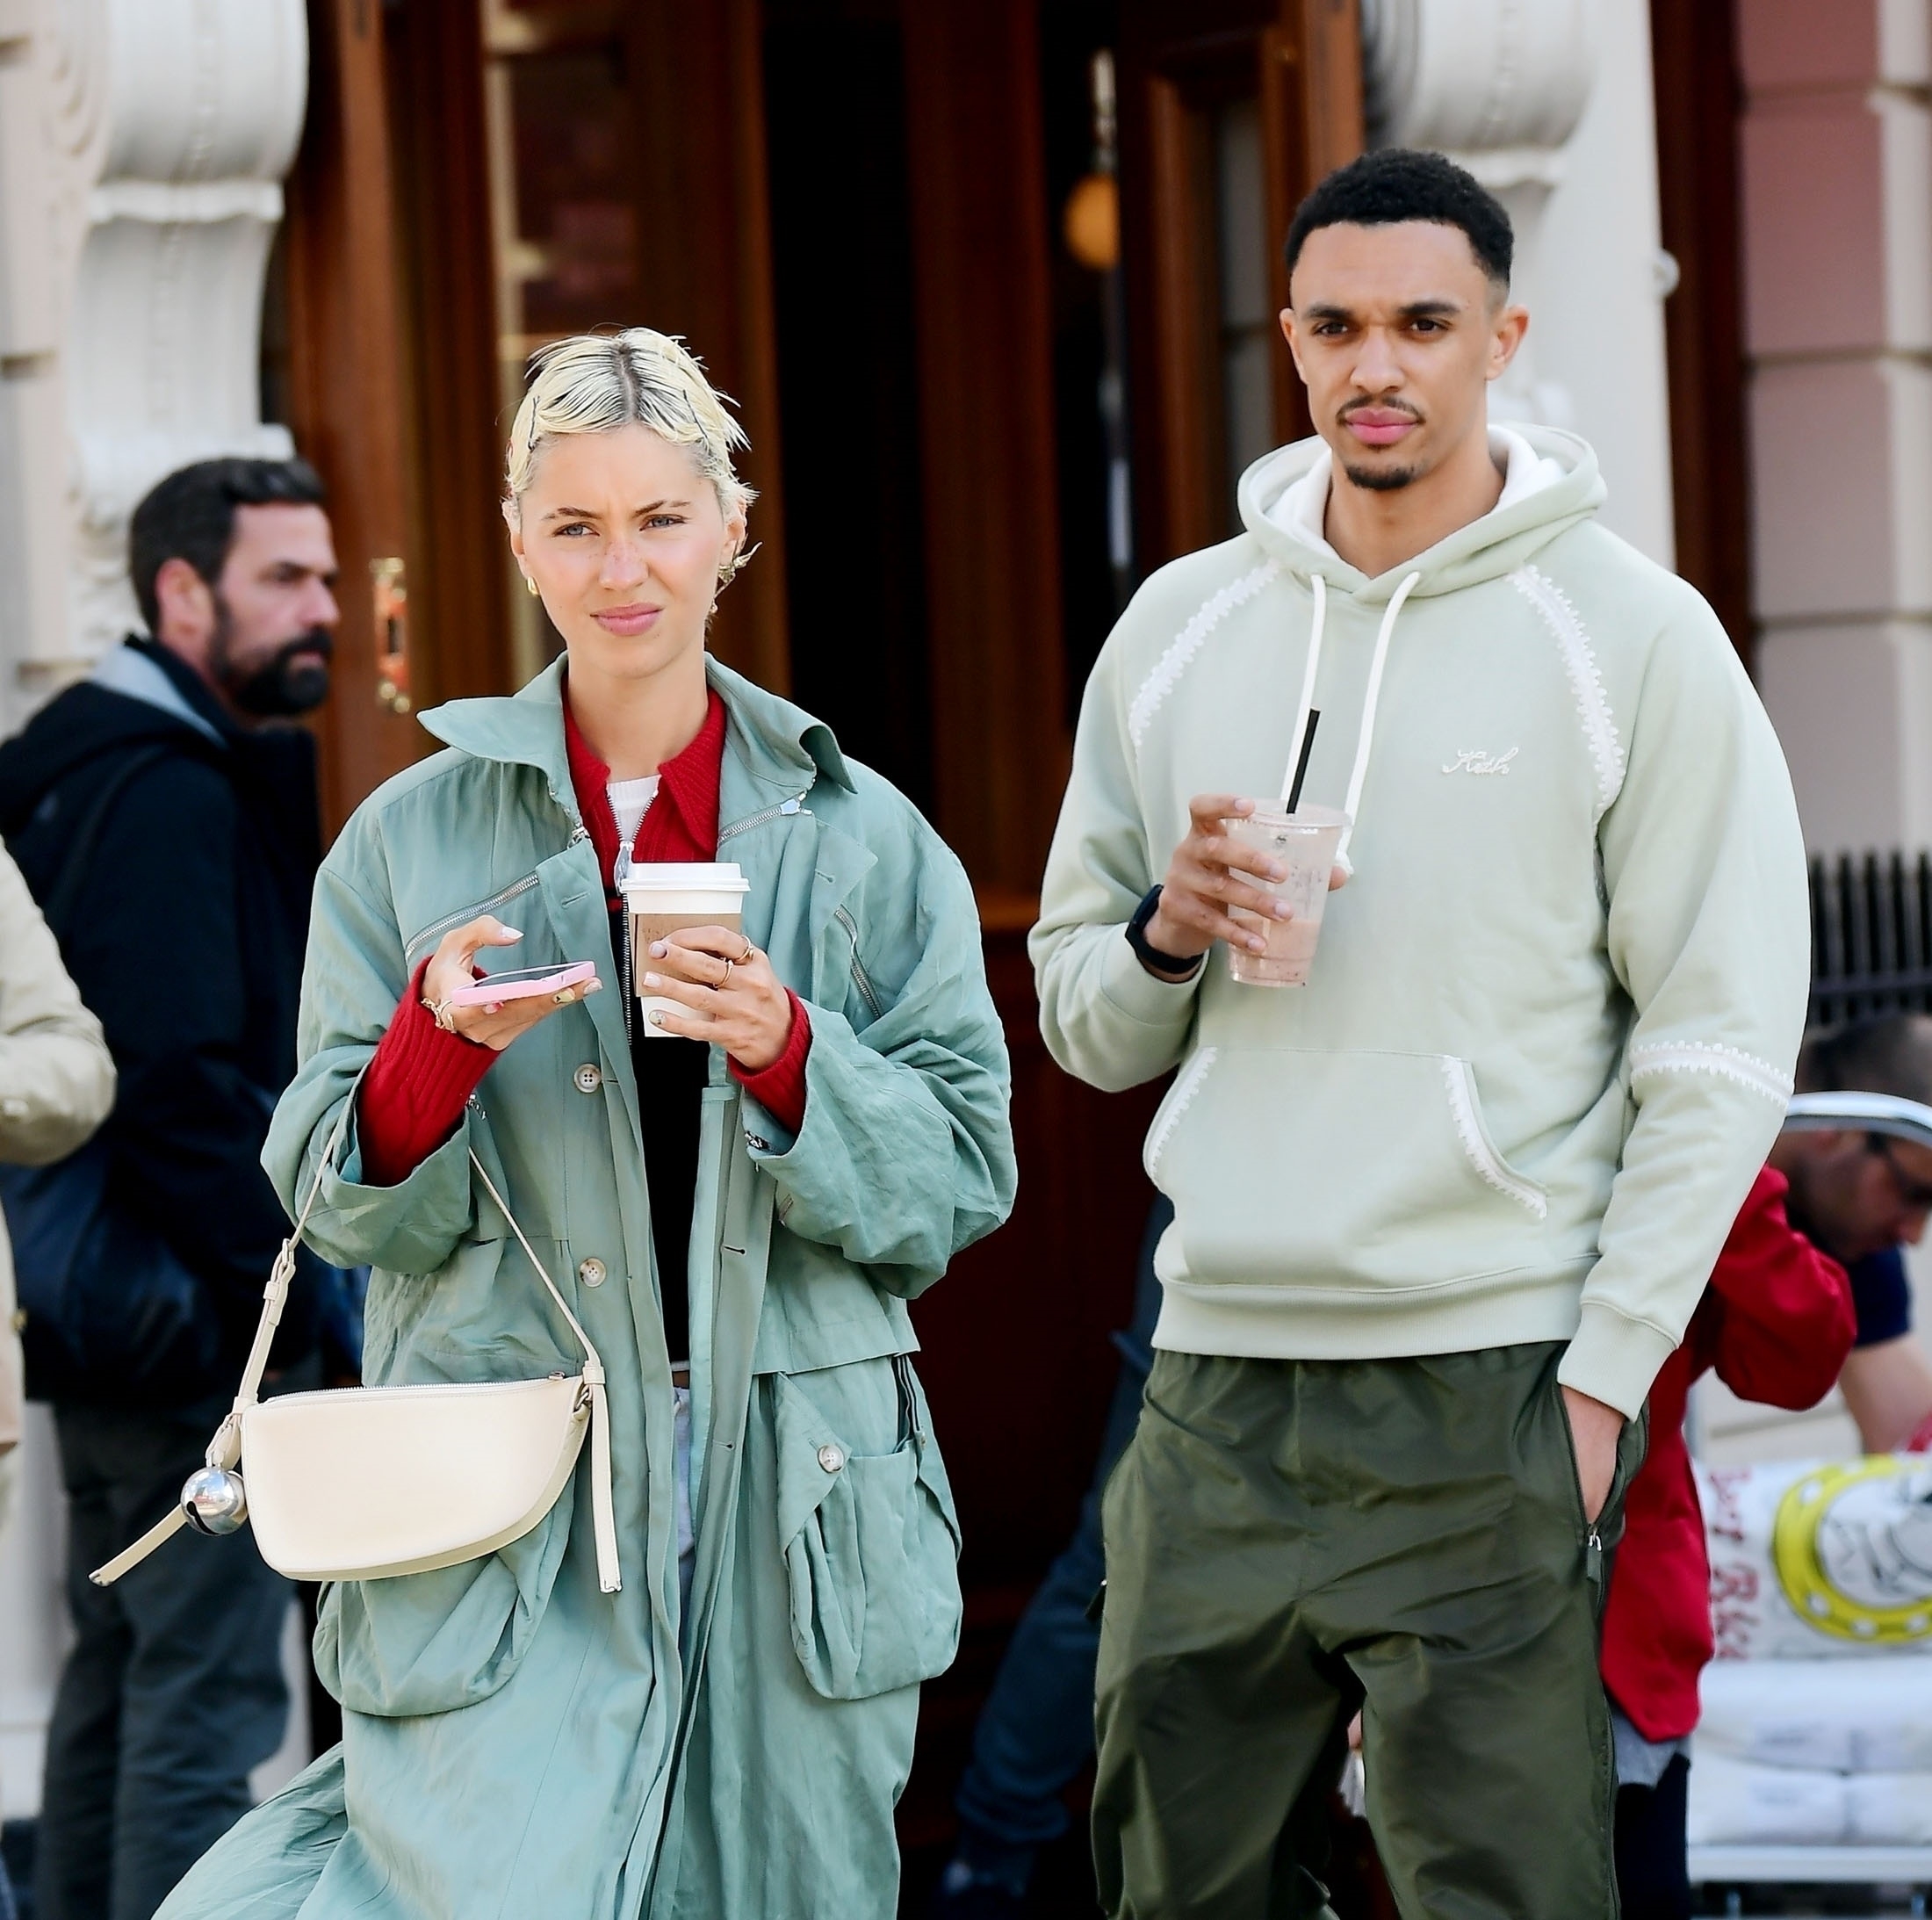 Iris had a coffee cup while Alexander-Arnold had a smoothie in hand